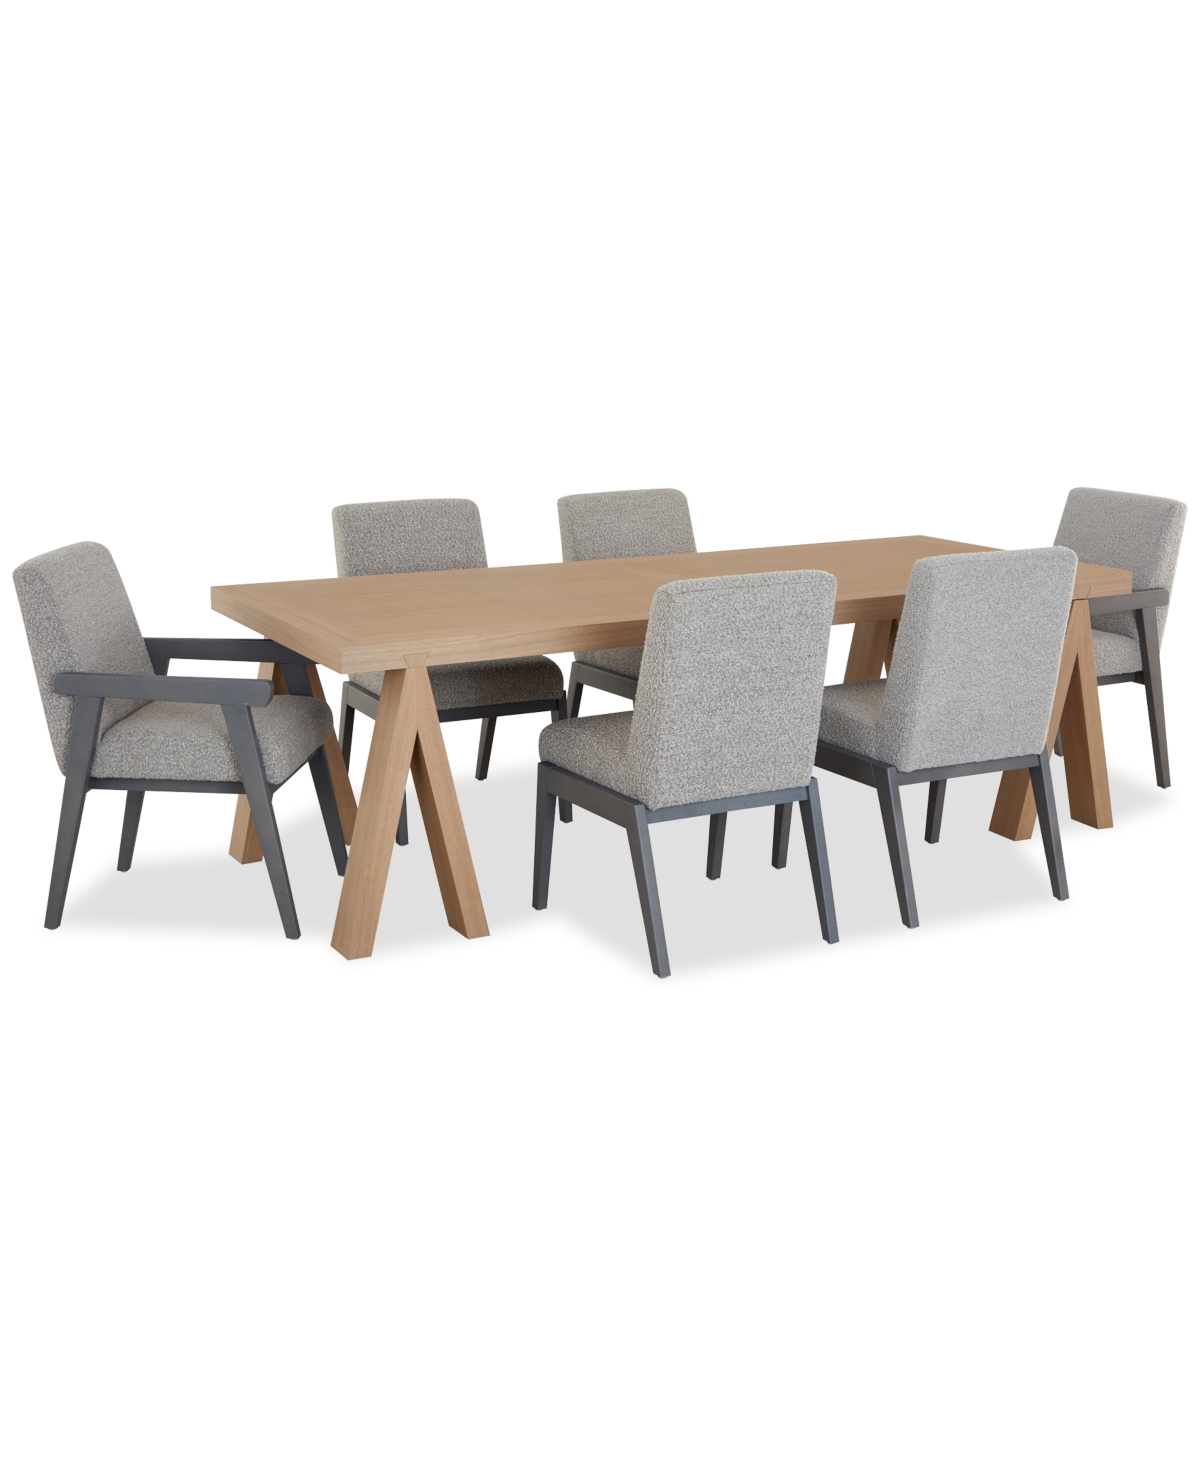 Drexel Atwell 7pc Dining Set (table + 4 Side Chairs + 2 Arm Chairs) In No Color